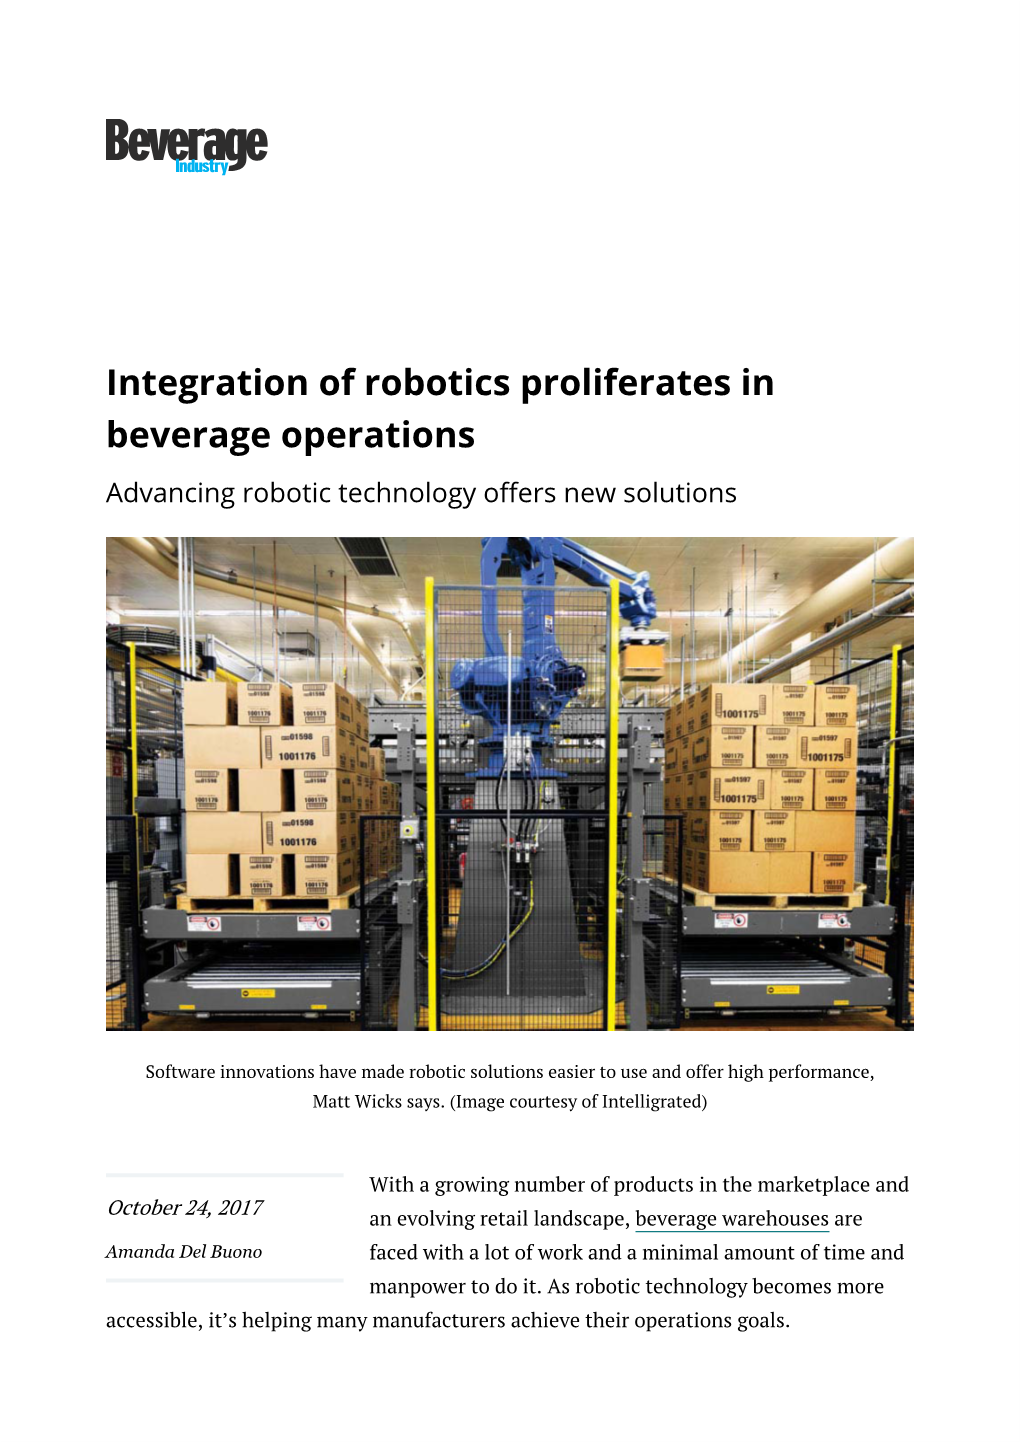 Integration of Robotics Proliferates in Beverage Operations Advancing Robotic Technology Offers New Solutions